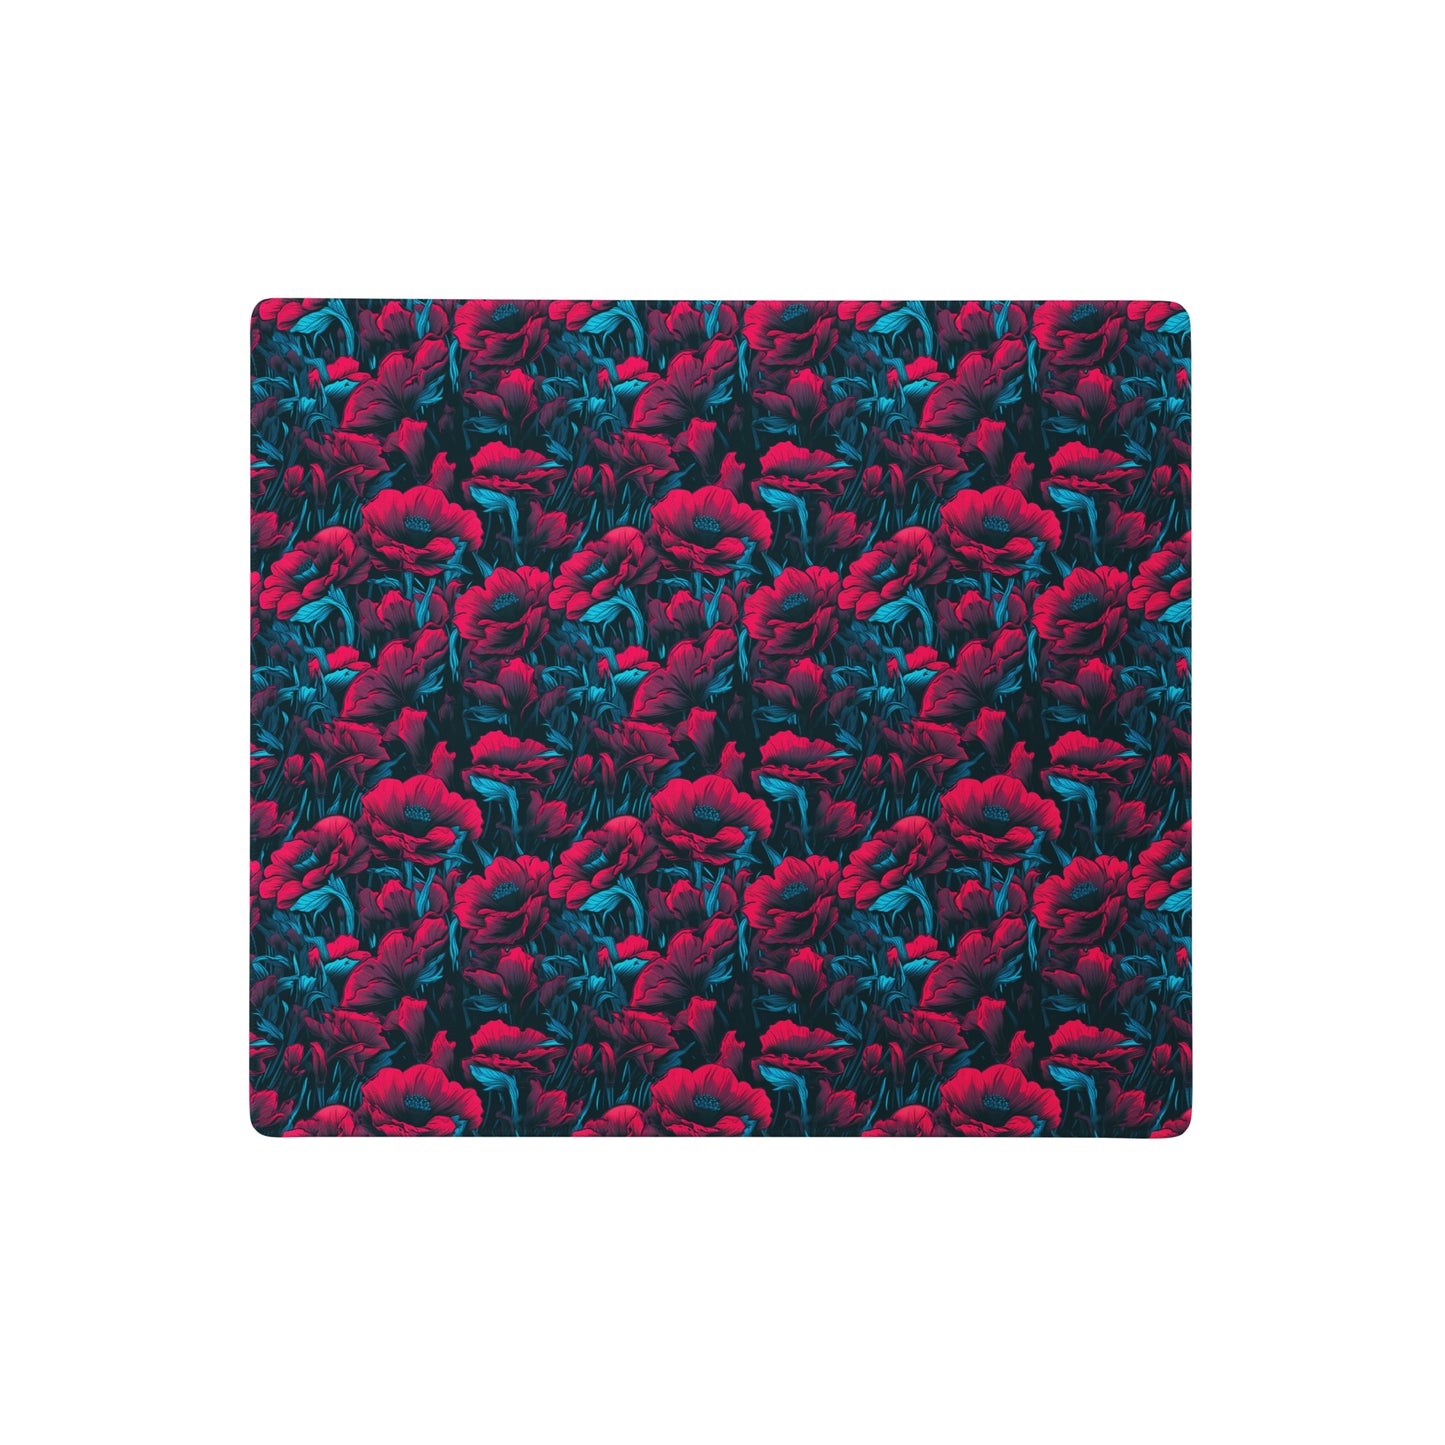 A 18" x 16" desk pad with a red and blue floral pattern.